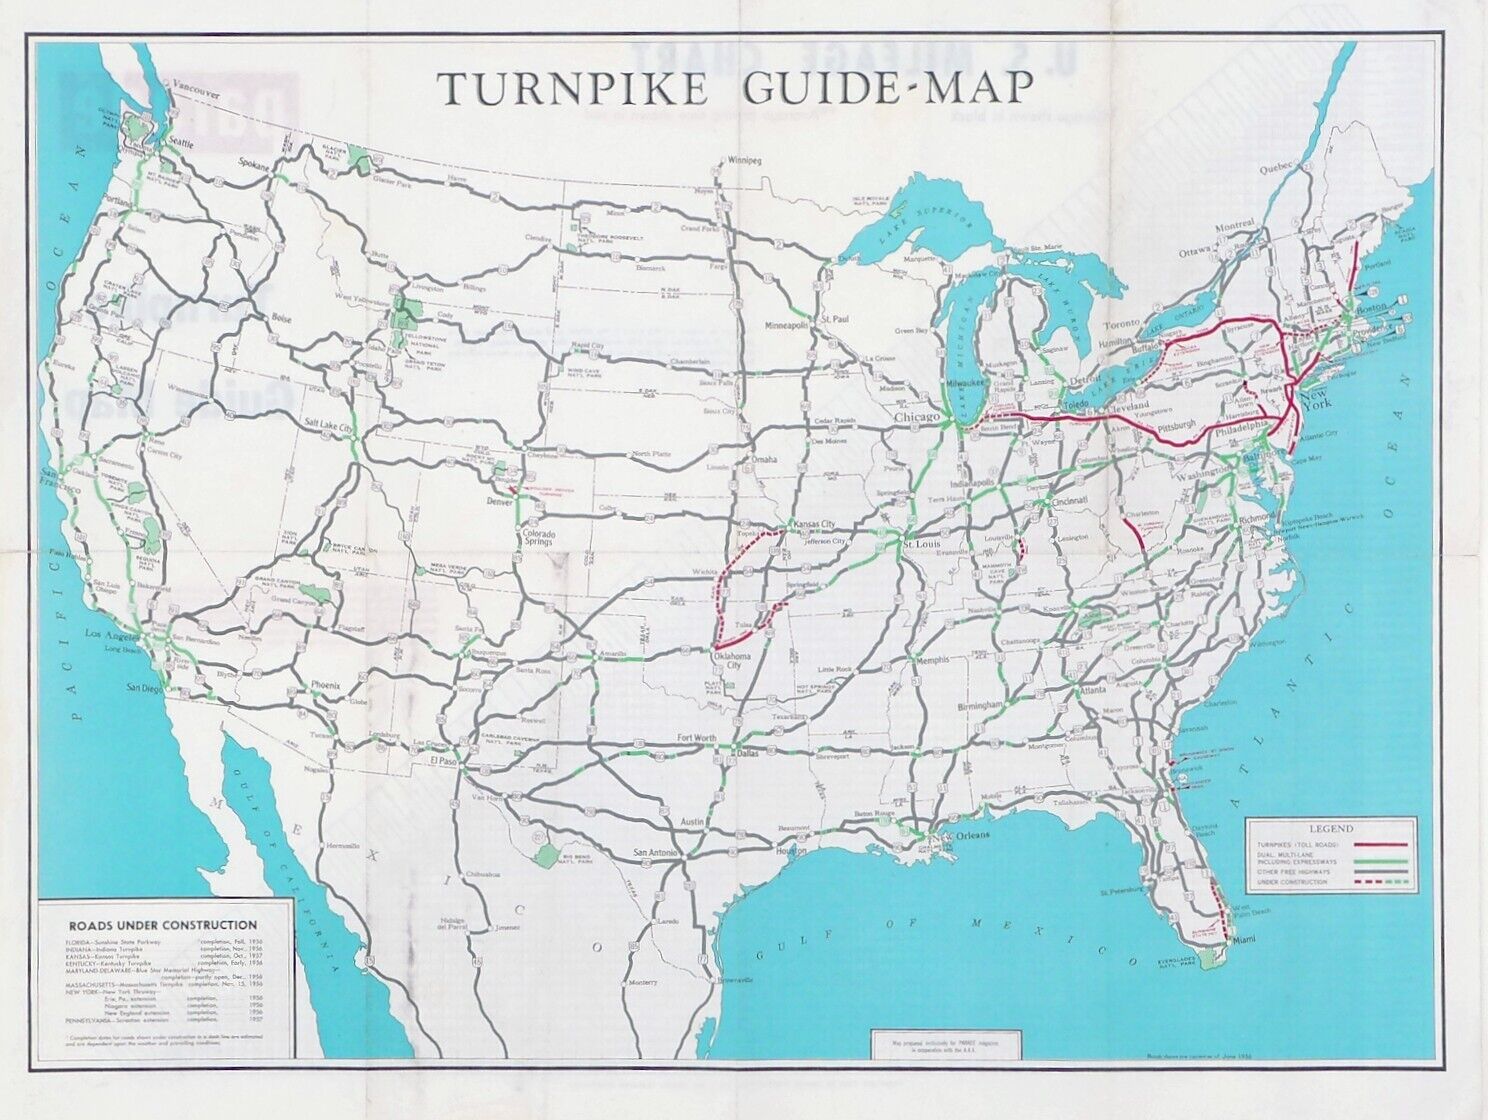 1950s Map of the Turnpike System, Interstate Highways, with Guidebook